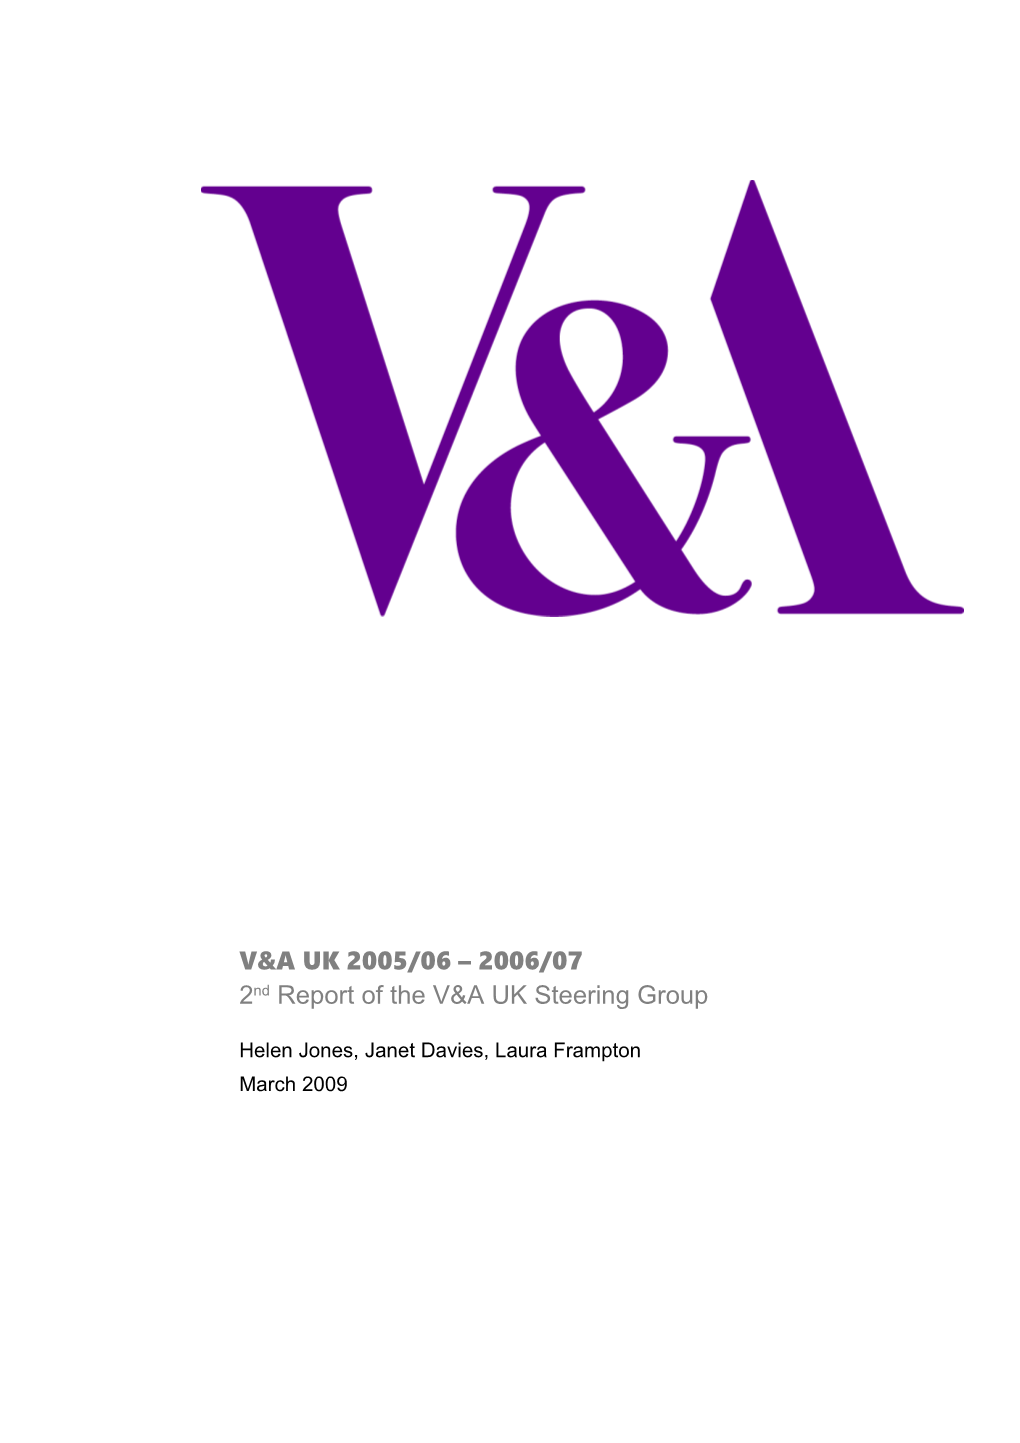 2Nd Report of the V&A UK Steering Group